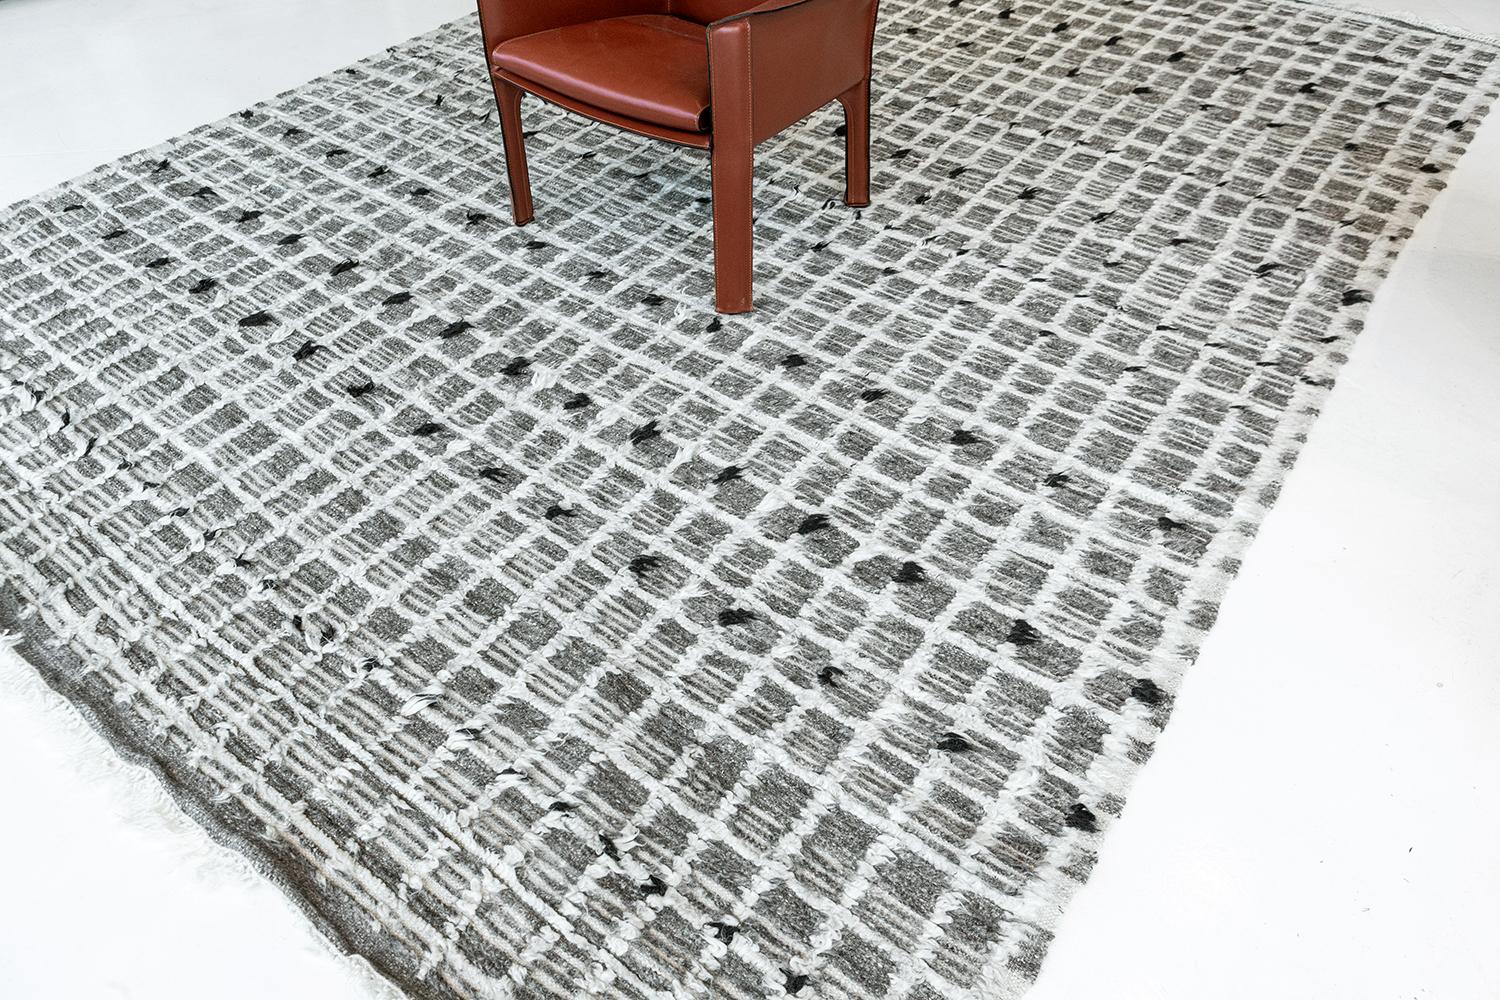 Amihan is a beautifully detailed pile weave from our Atlas Collection. The delicate checkered and ribbed style rug with ash gray tones give it a rich and charming feel. Repeating ash pile detailing also brings a bold and noteworthy uniqueness to